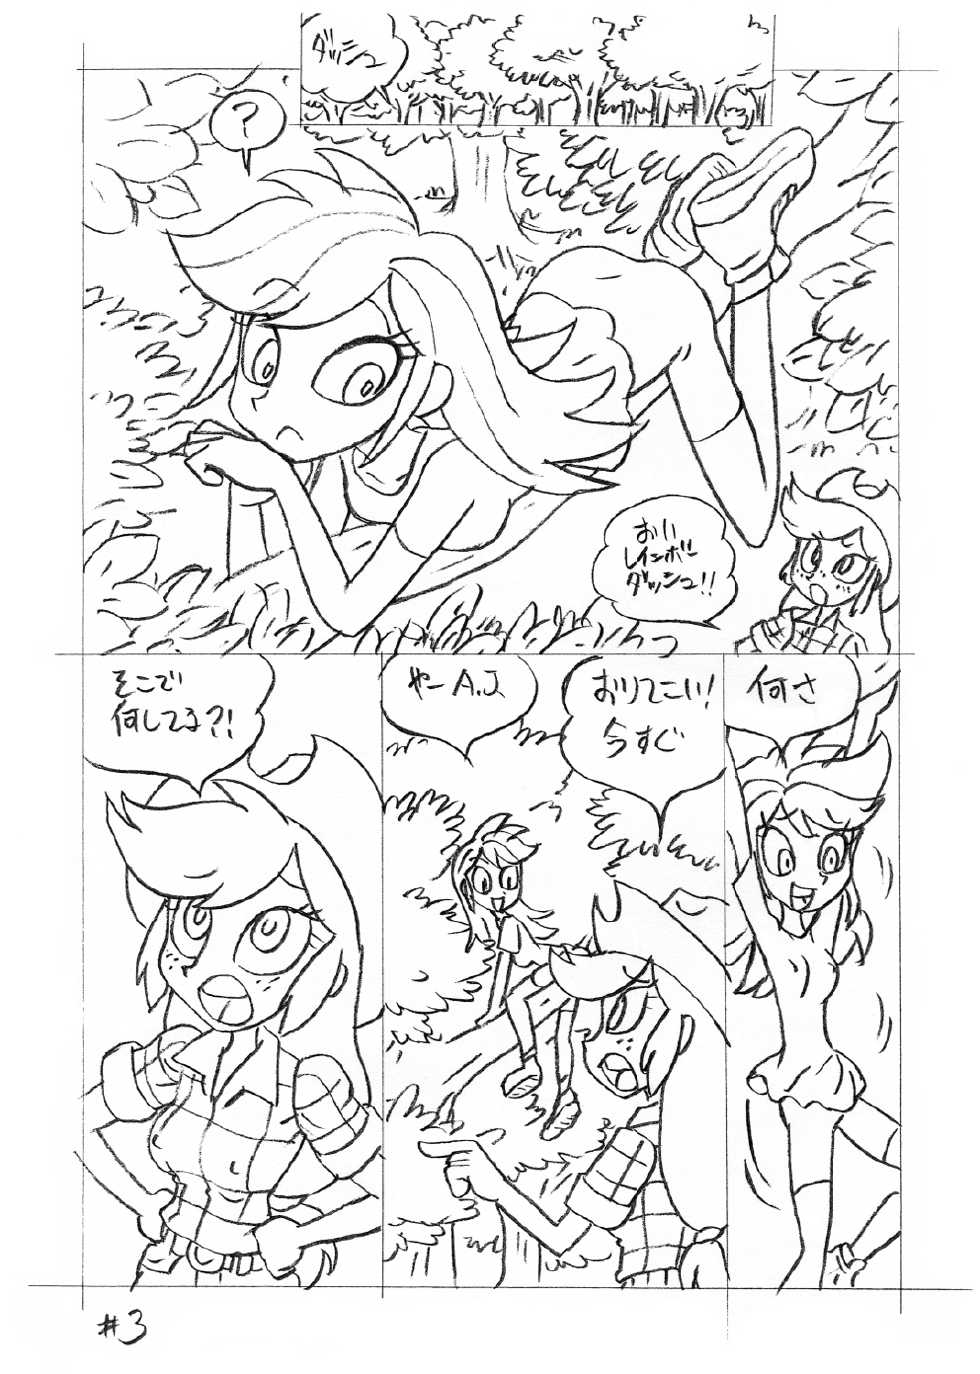 [Union of the Snake (Shinda Mane)] Psychosomatic Counterfeit EX- A.J. in E.G. Style (Ver. 02) (My Little Pony: Friendship Is Magic) - Page 2